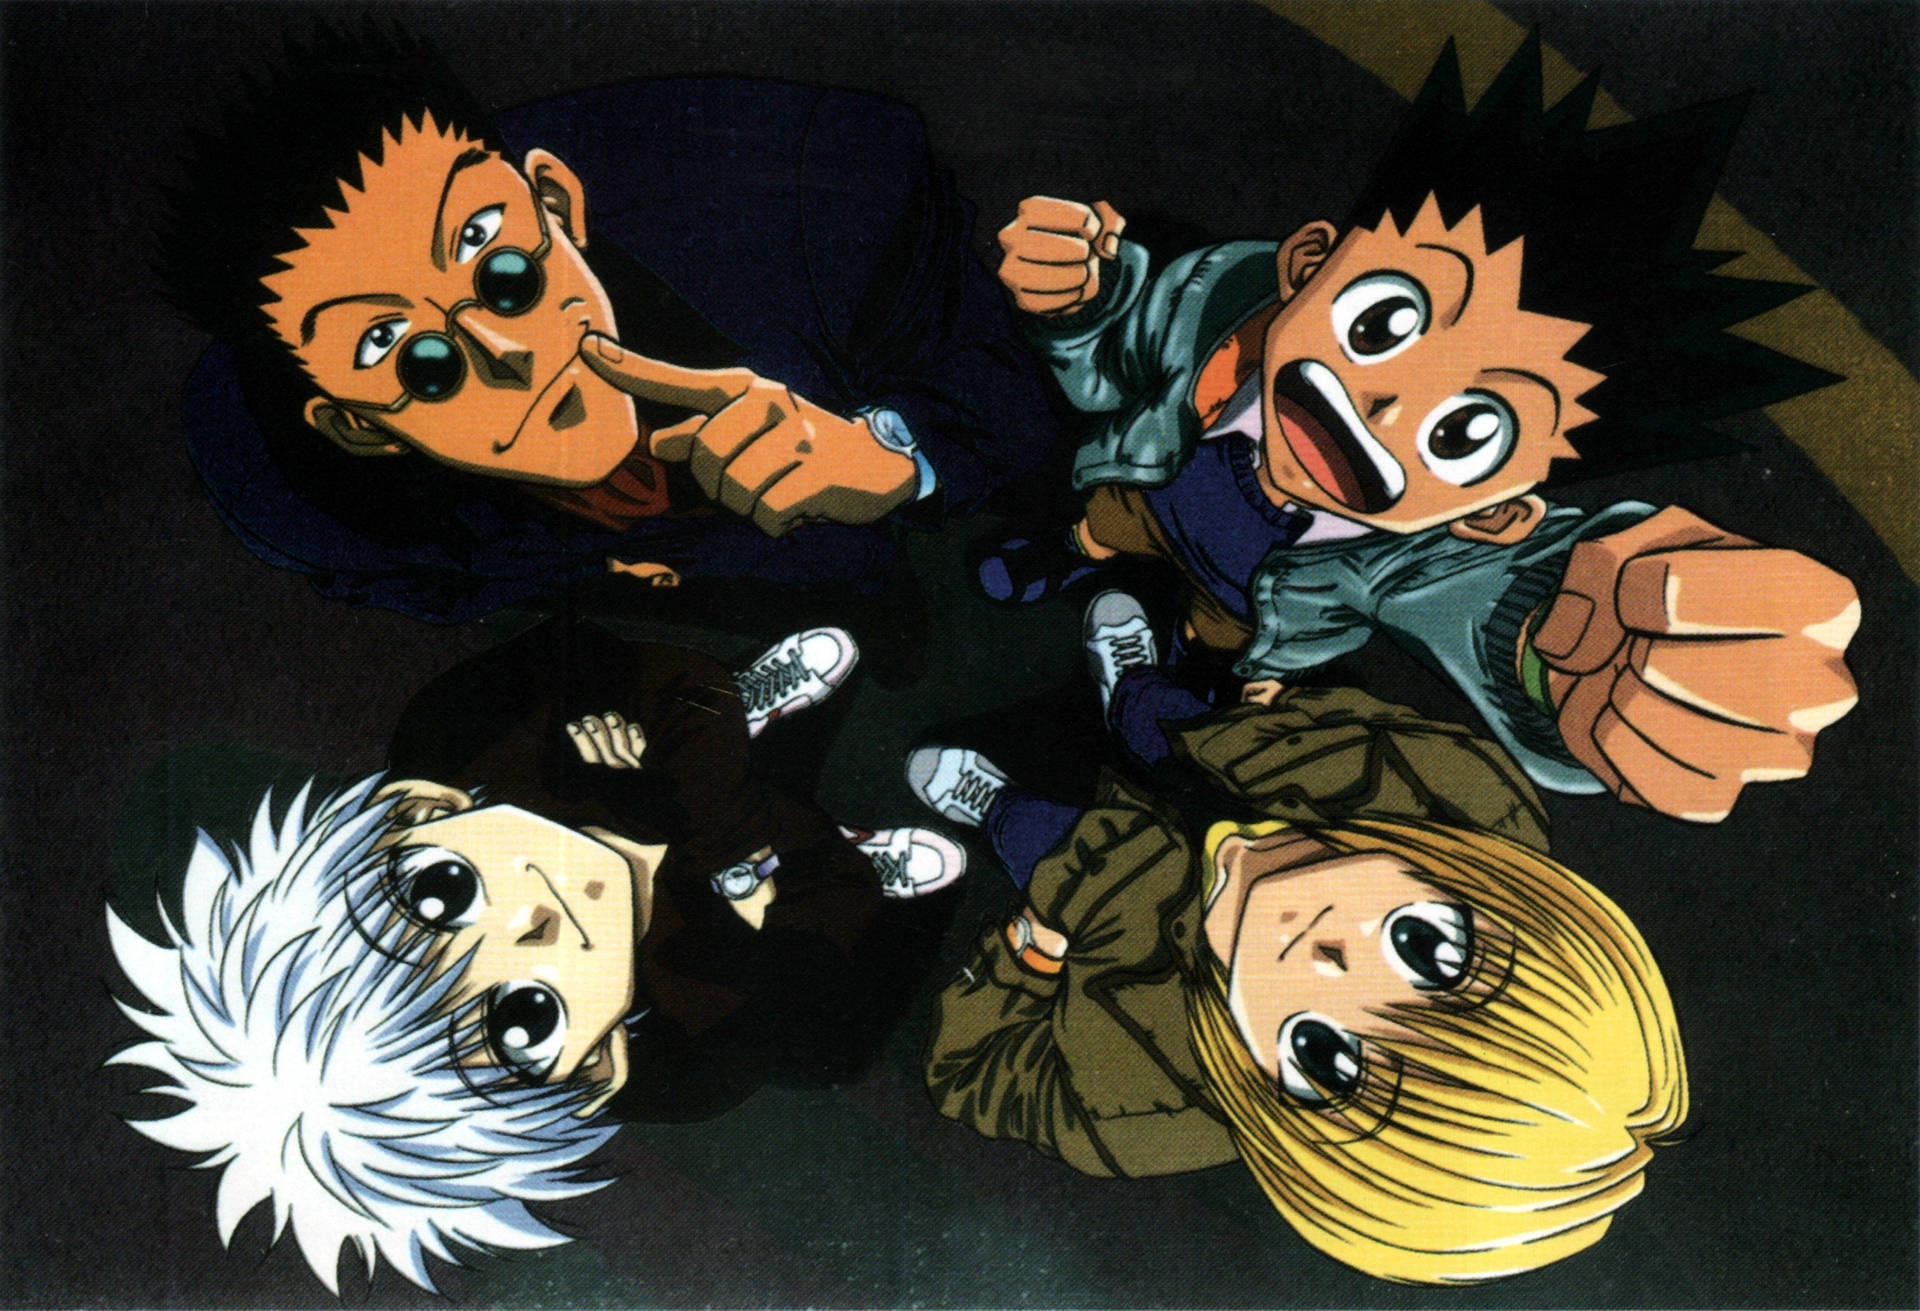 Cheering with Friends - Killua and his pals, having a blast! Wallpaper